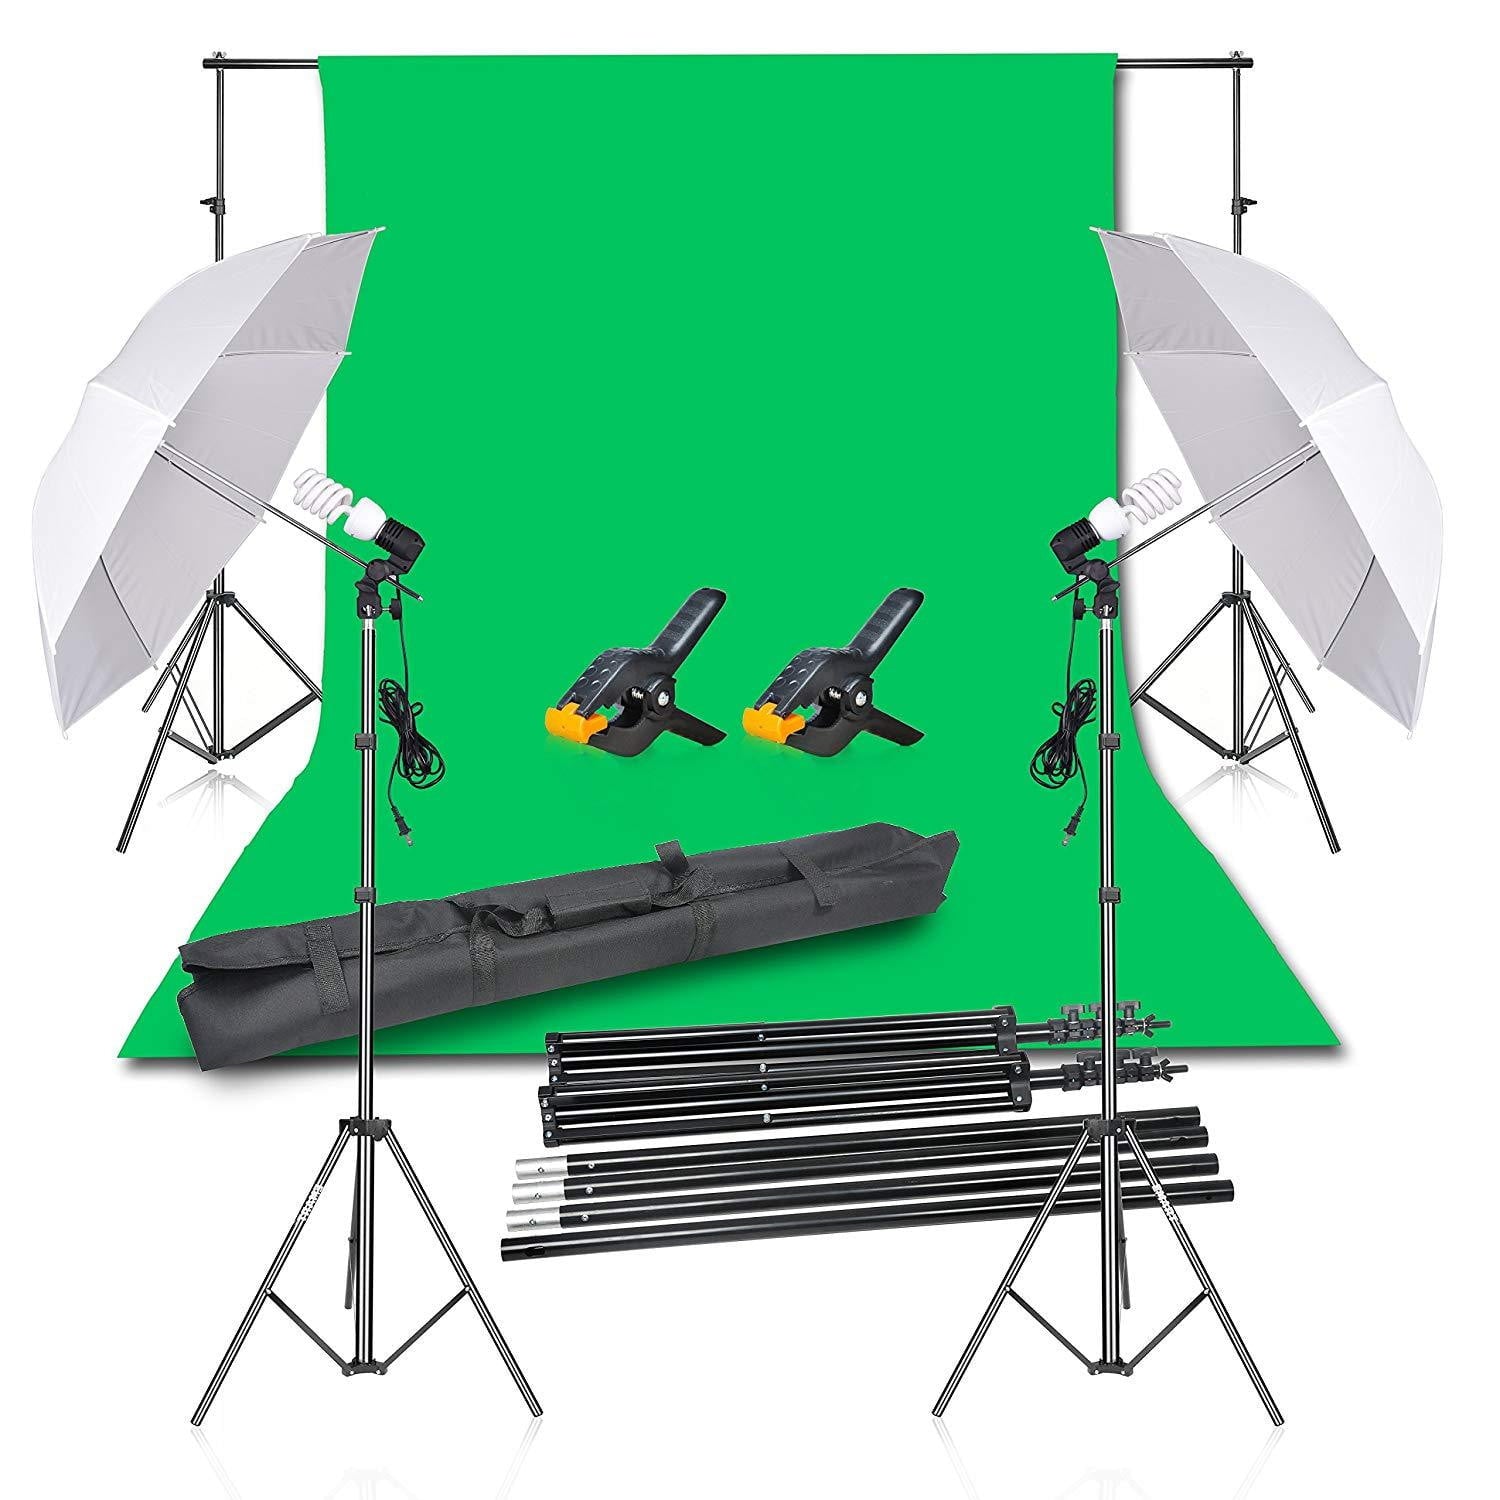 EMART Photography Backdrop Umbrella Studio Lighting Kit, Muslin Chromakey Green Screen and Background Stand Support System - EMART INTERNATIONAL, INC (Official Website)